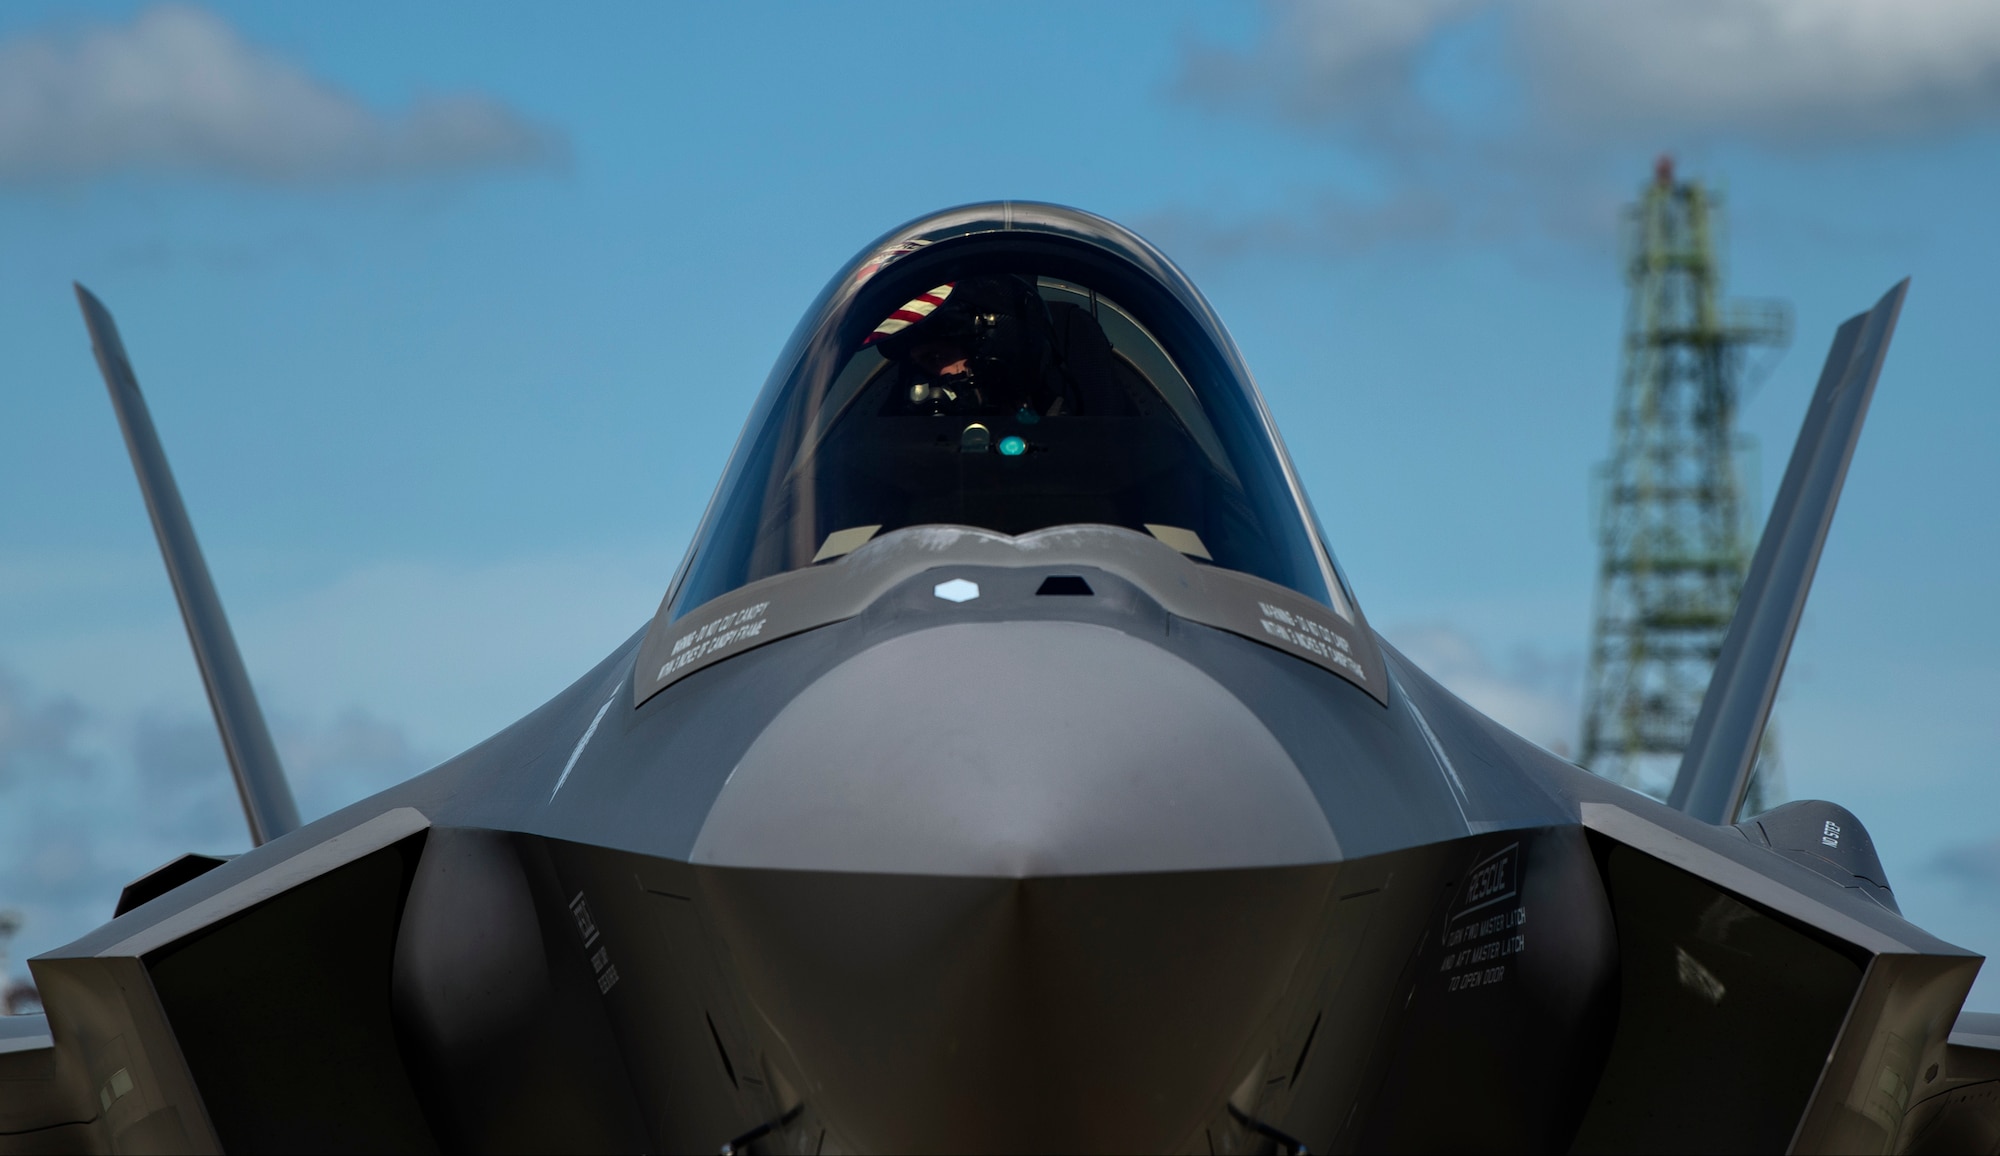 U.S. Air Force Capt. Russell Lee, 421st Fighter Squadron pilot, taxis his F-35A Lightning II fighter aircraft, assigned to the 421st FS from Hill Air Force Base, Utah, on the flightline at Spangdahlem Air Base, Germany, June 11, 2019. Multiple F-35s came to the European theater to train with partner nations as part of a Theater Security Package. Training with NATO aircraft enhances relationships and improves overall coordination with allies. (U.S. Air Force photo by Airman 1st Class Valerie Seelye)